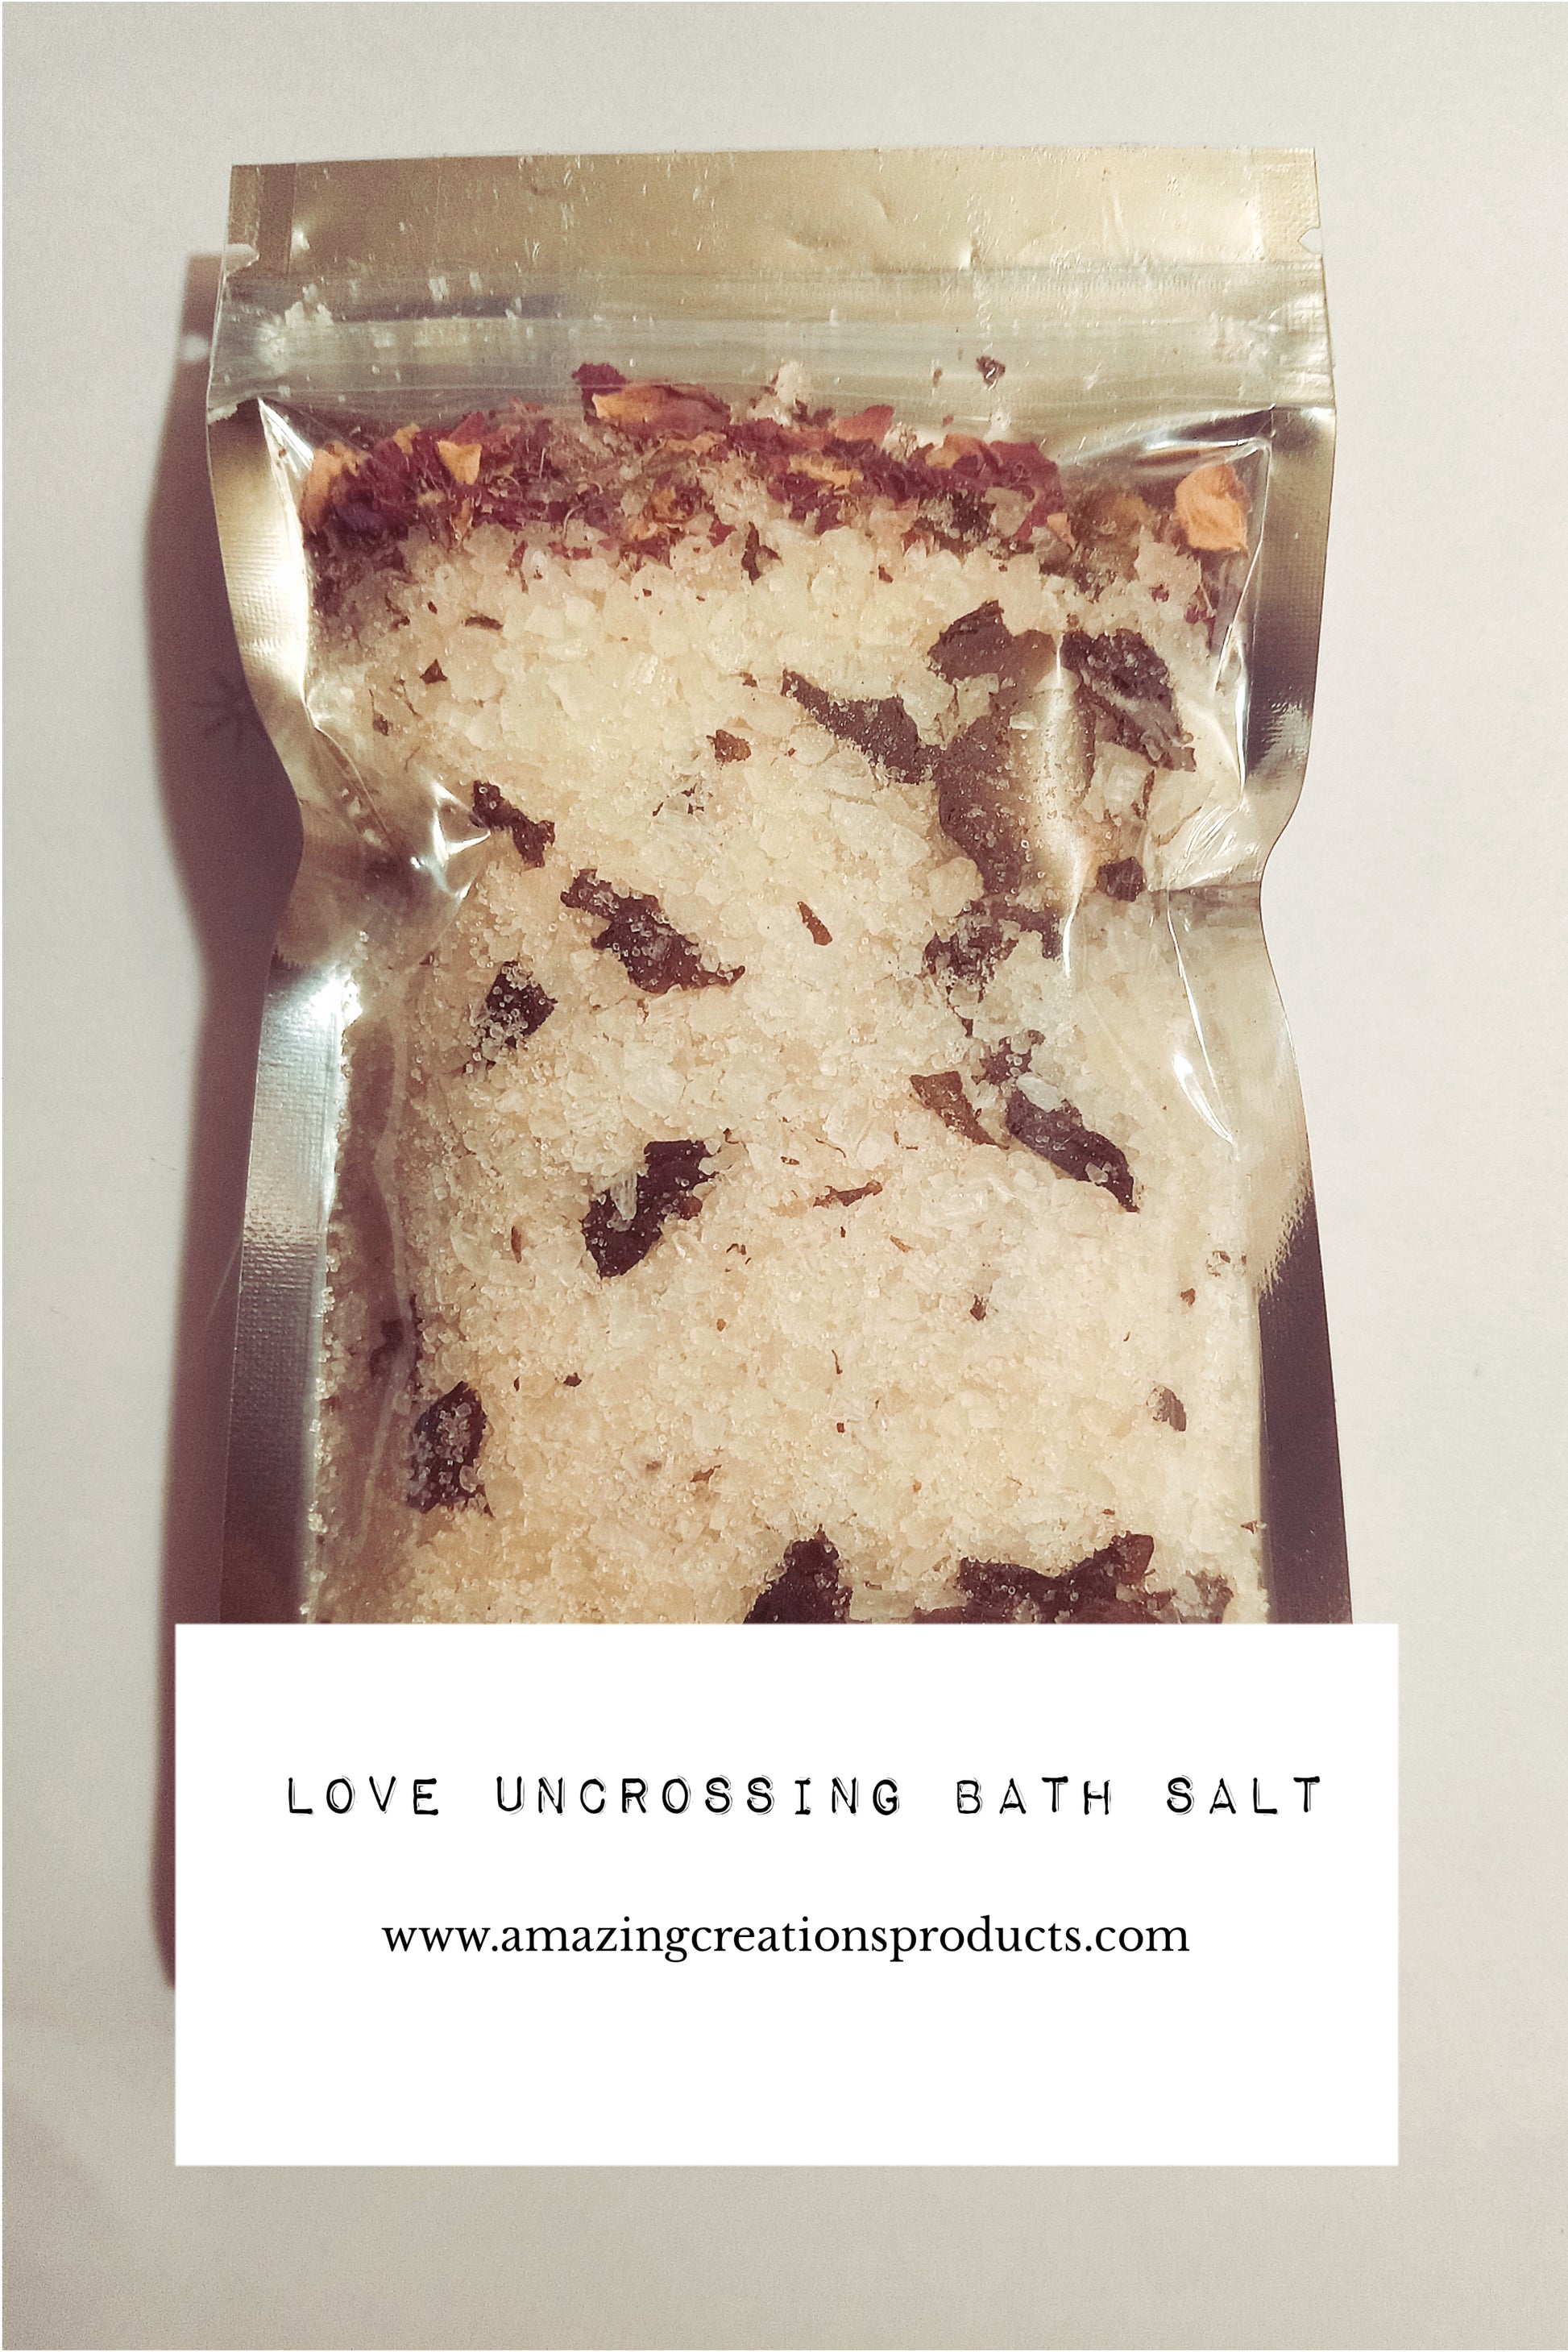  Love Uncrossing Bath Salt - Bath Salts available at Amazing Creations Products . Grab yours for $11 today!